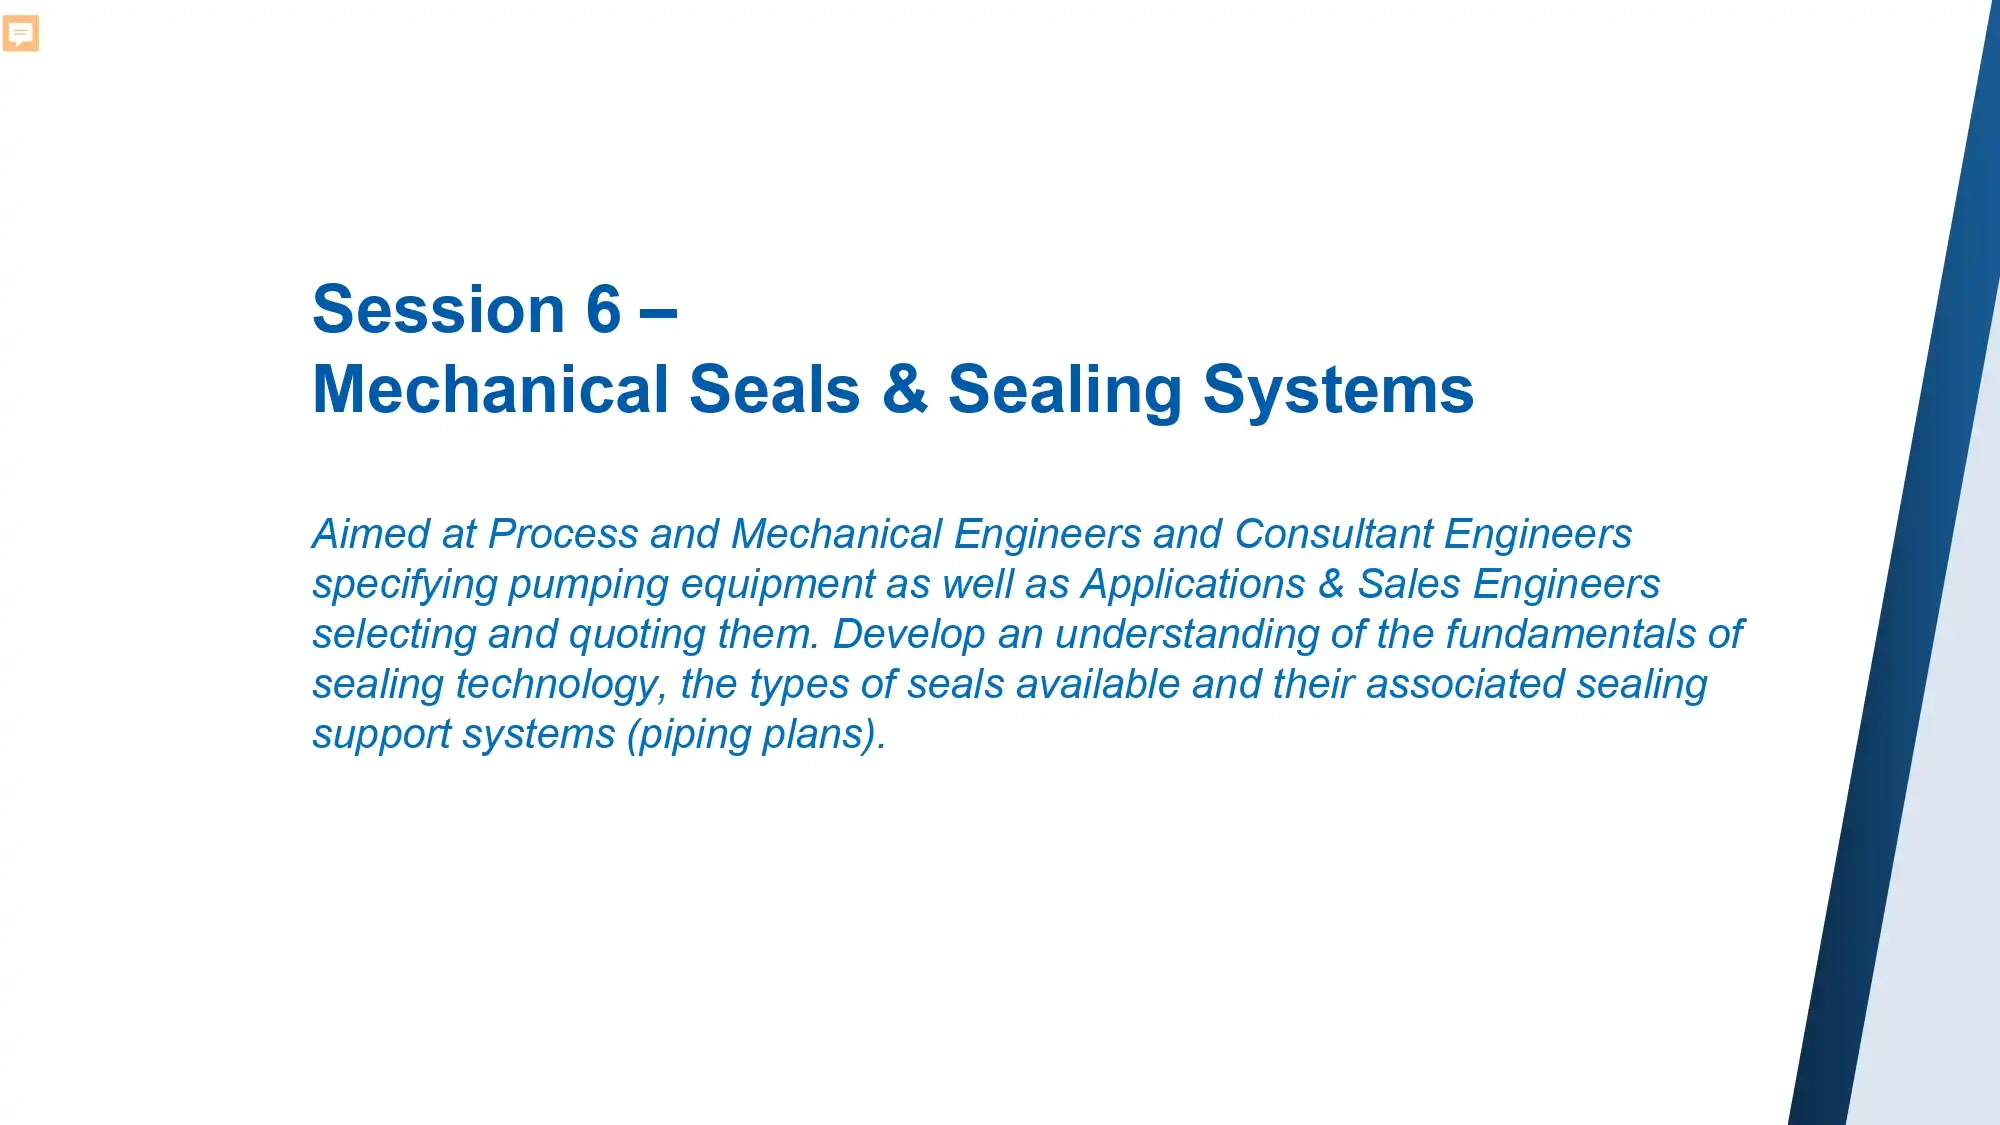 Session 6 – Mechanical Seals & Sealing Systems